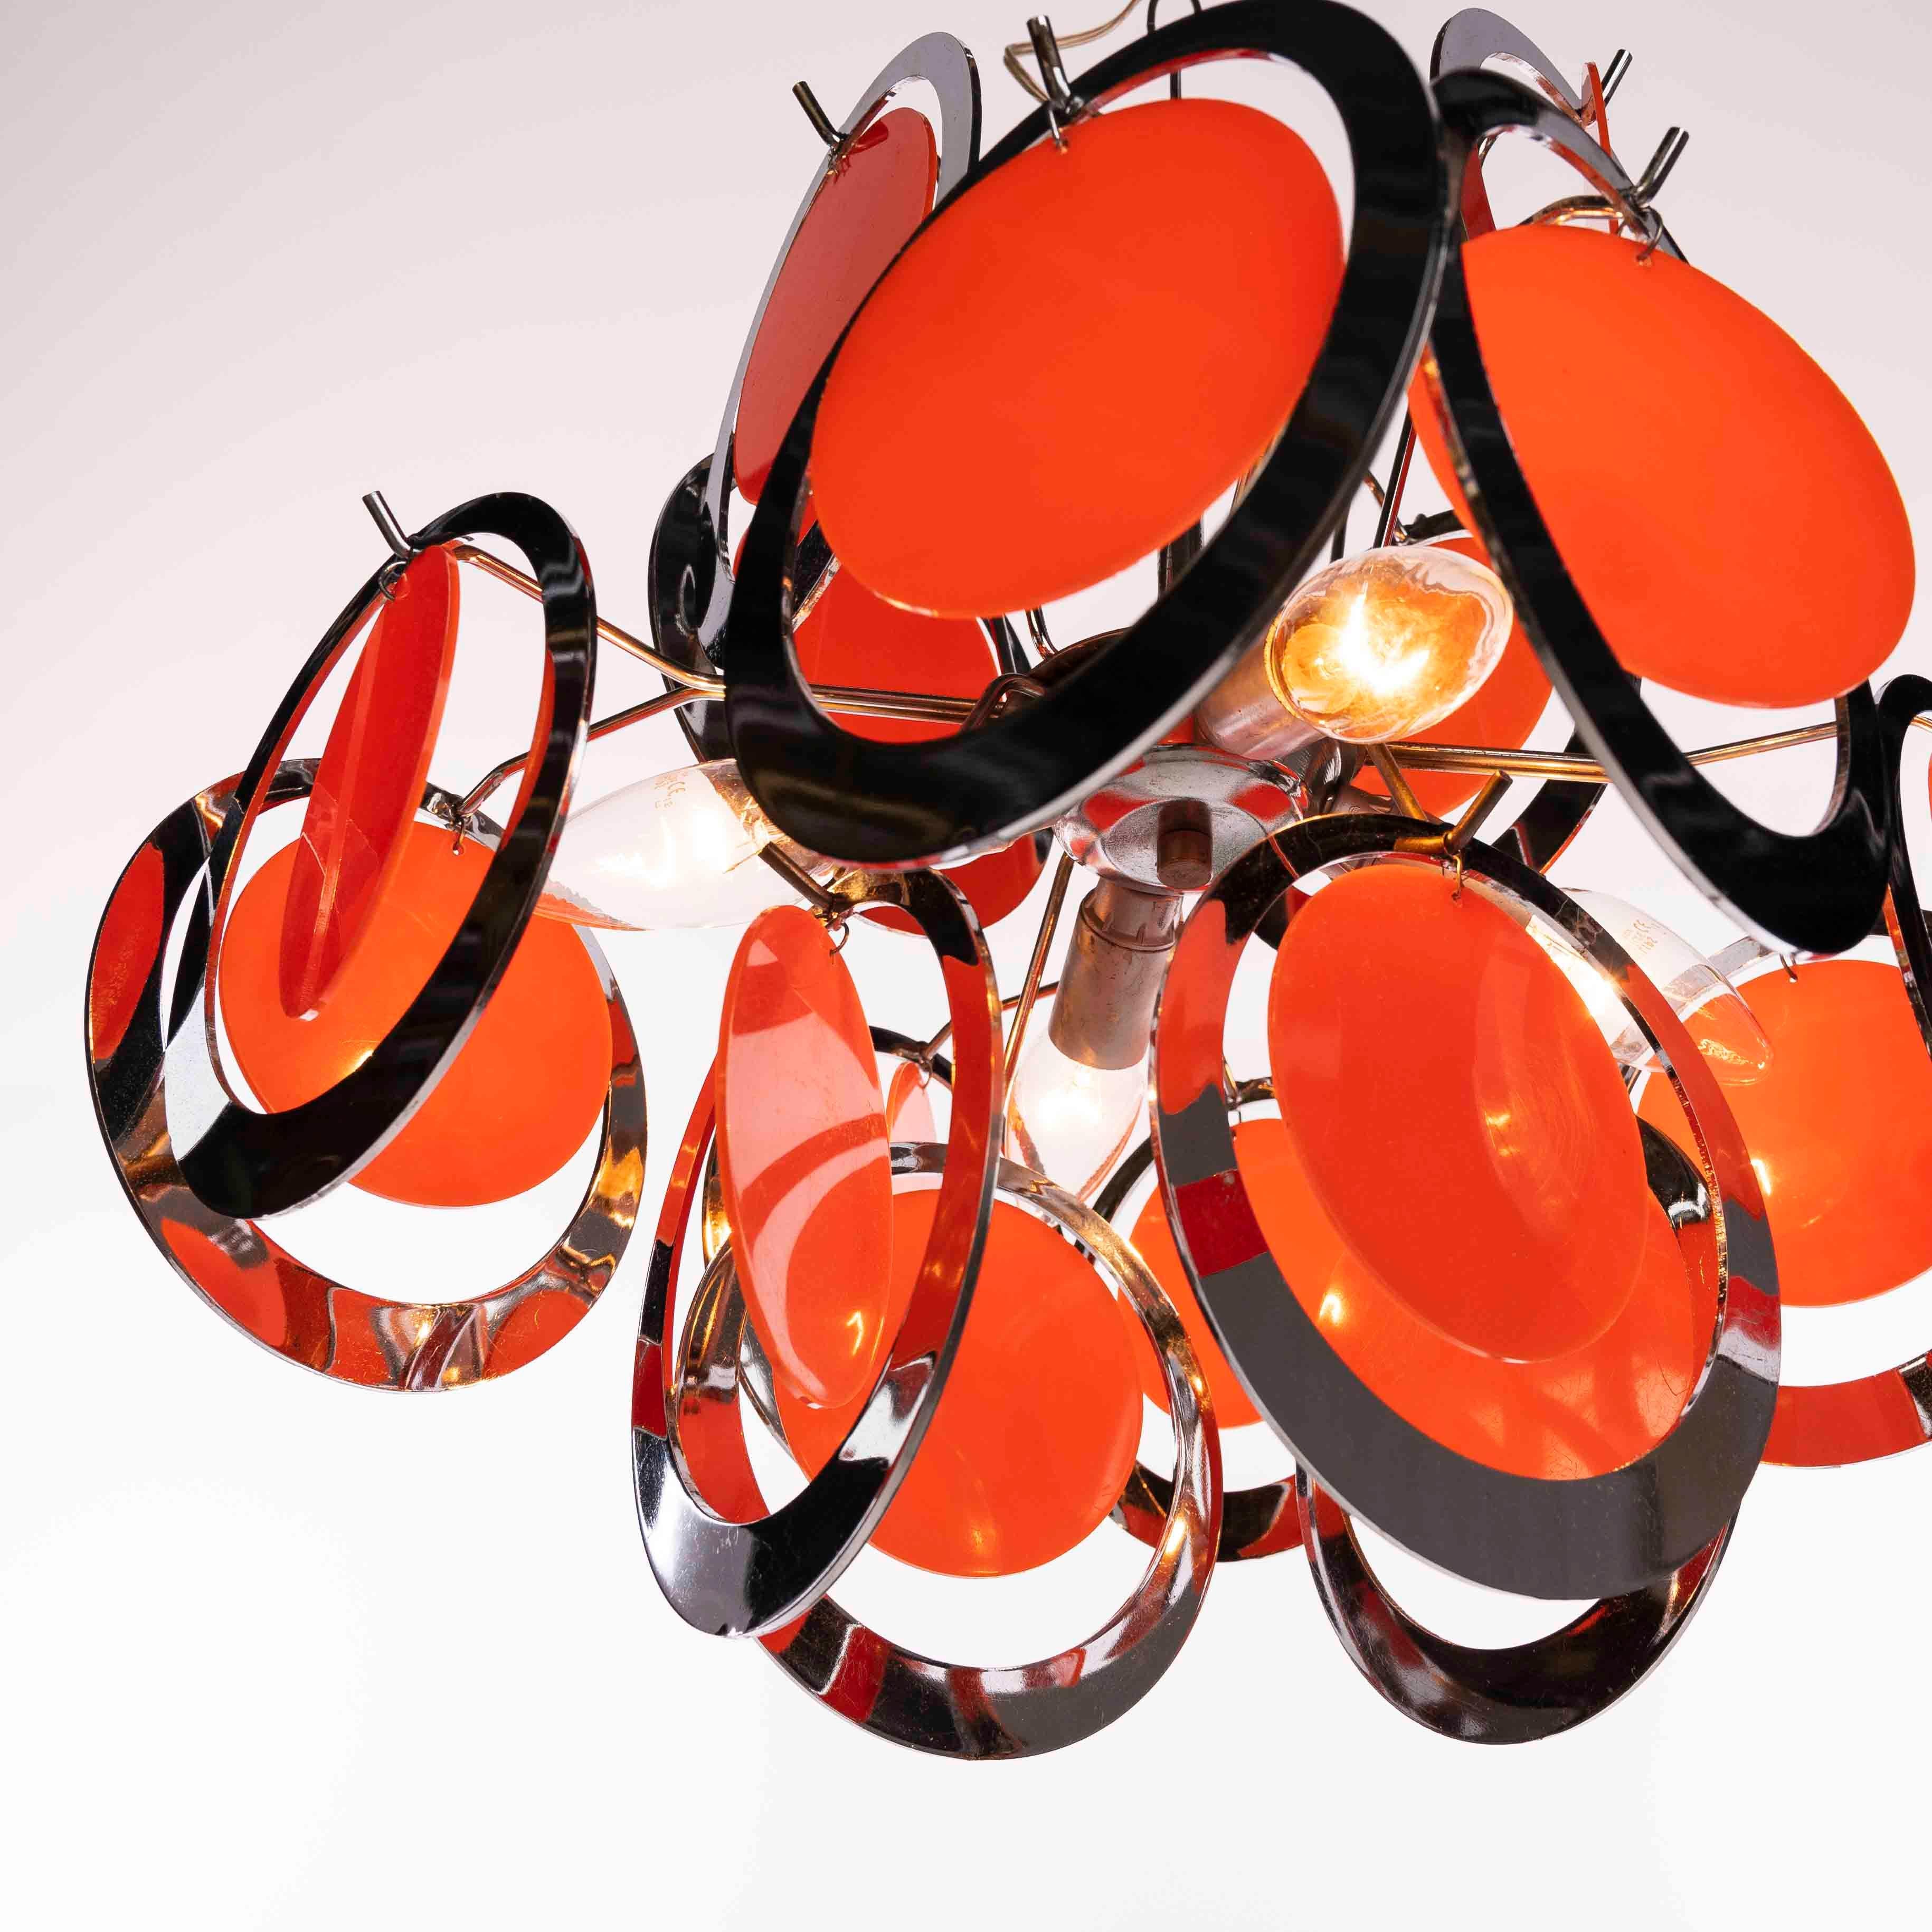 1970s Chromed Plastic Rings with Orange Plastic Circles In Fair Condition For Sale In Amsterdam, NH